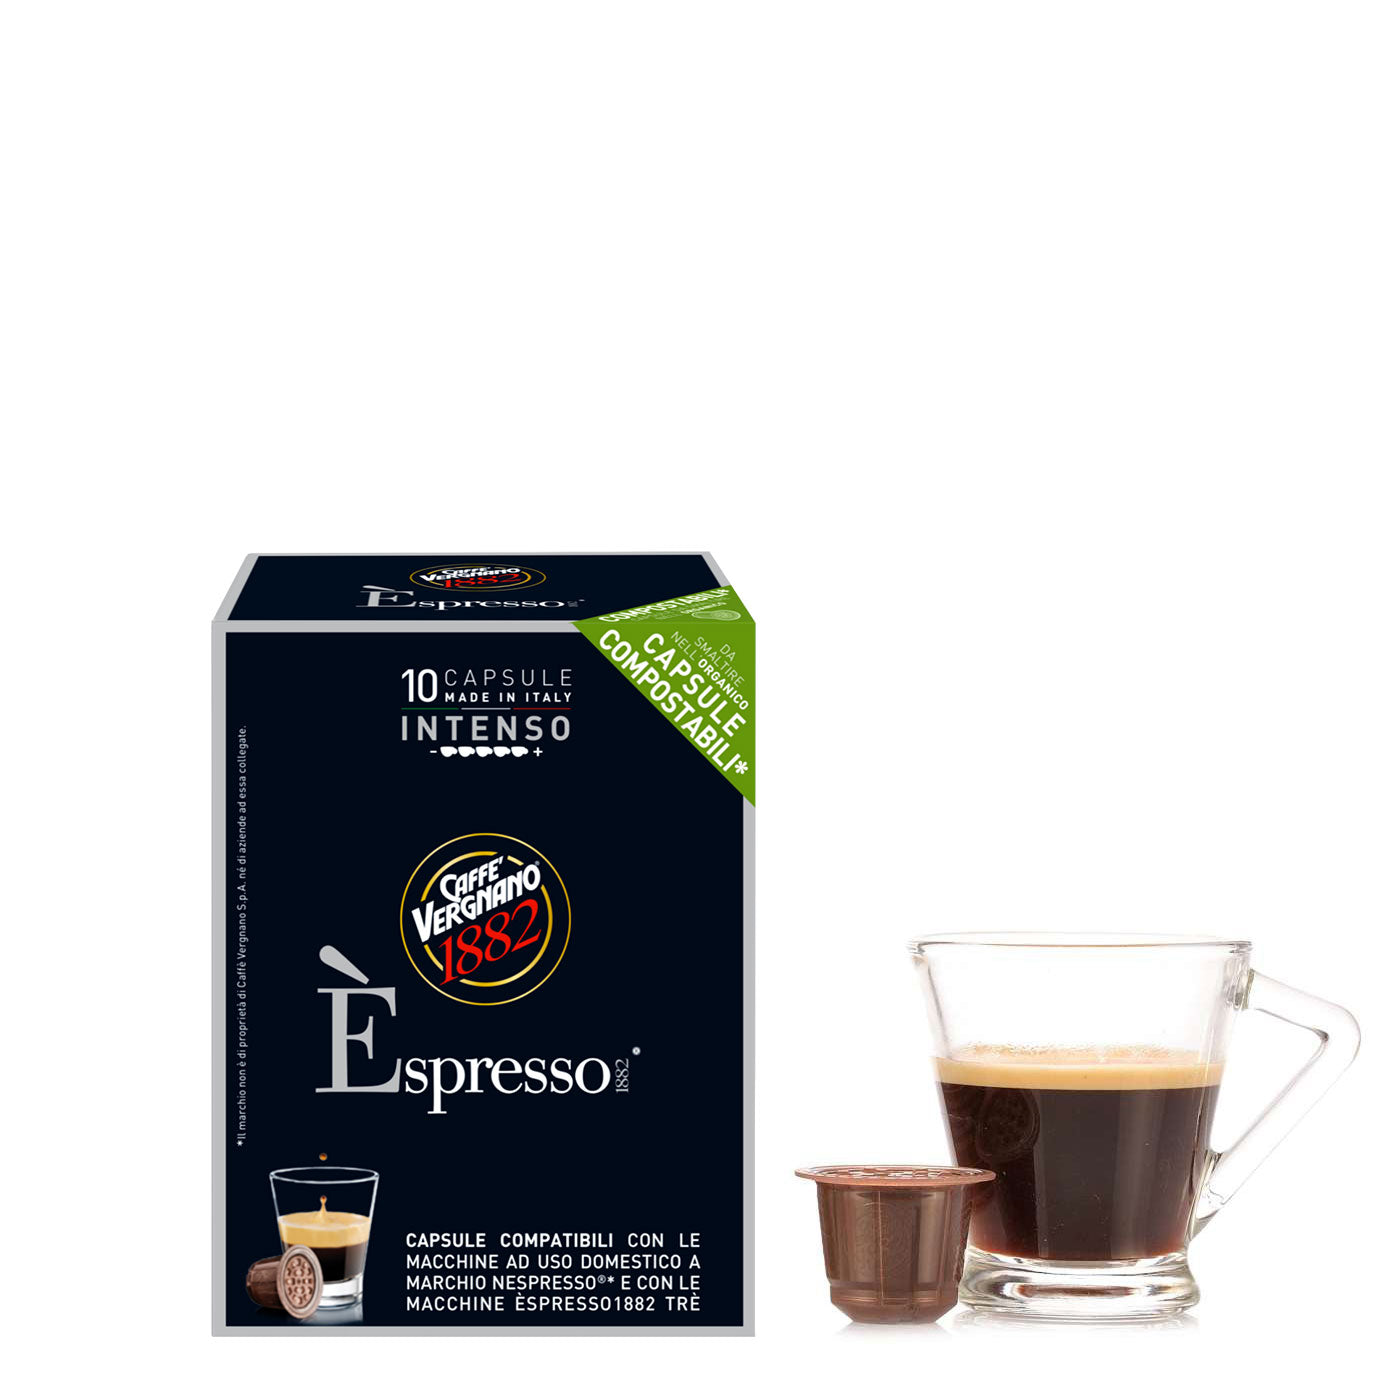 10 Capsules Lungo intenso – Eataly